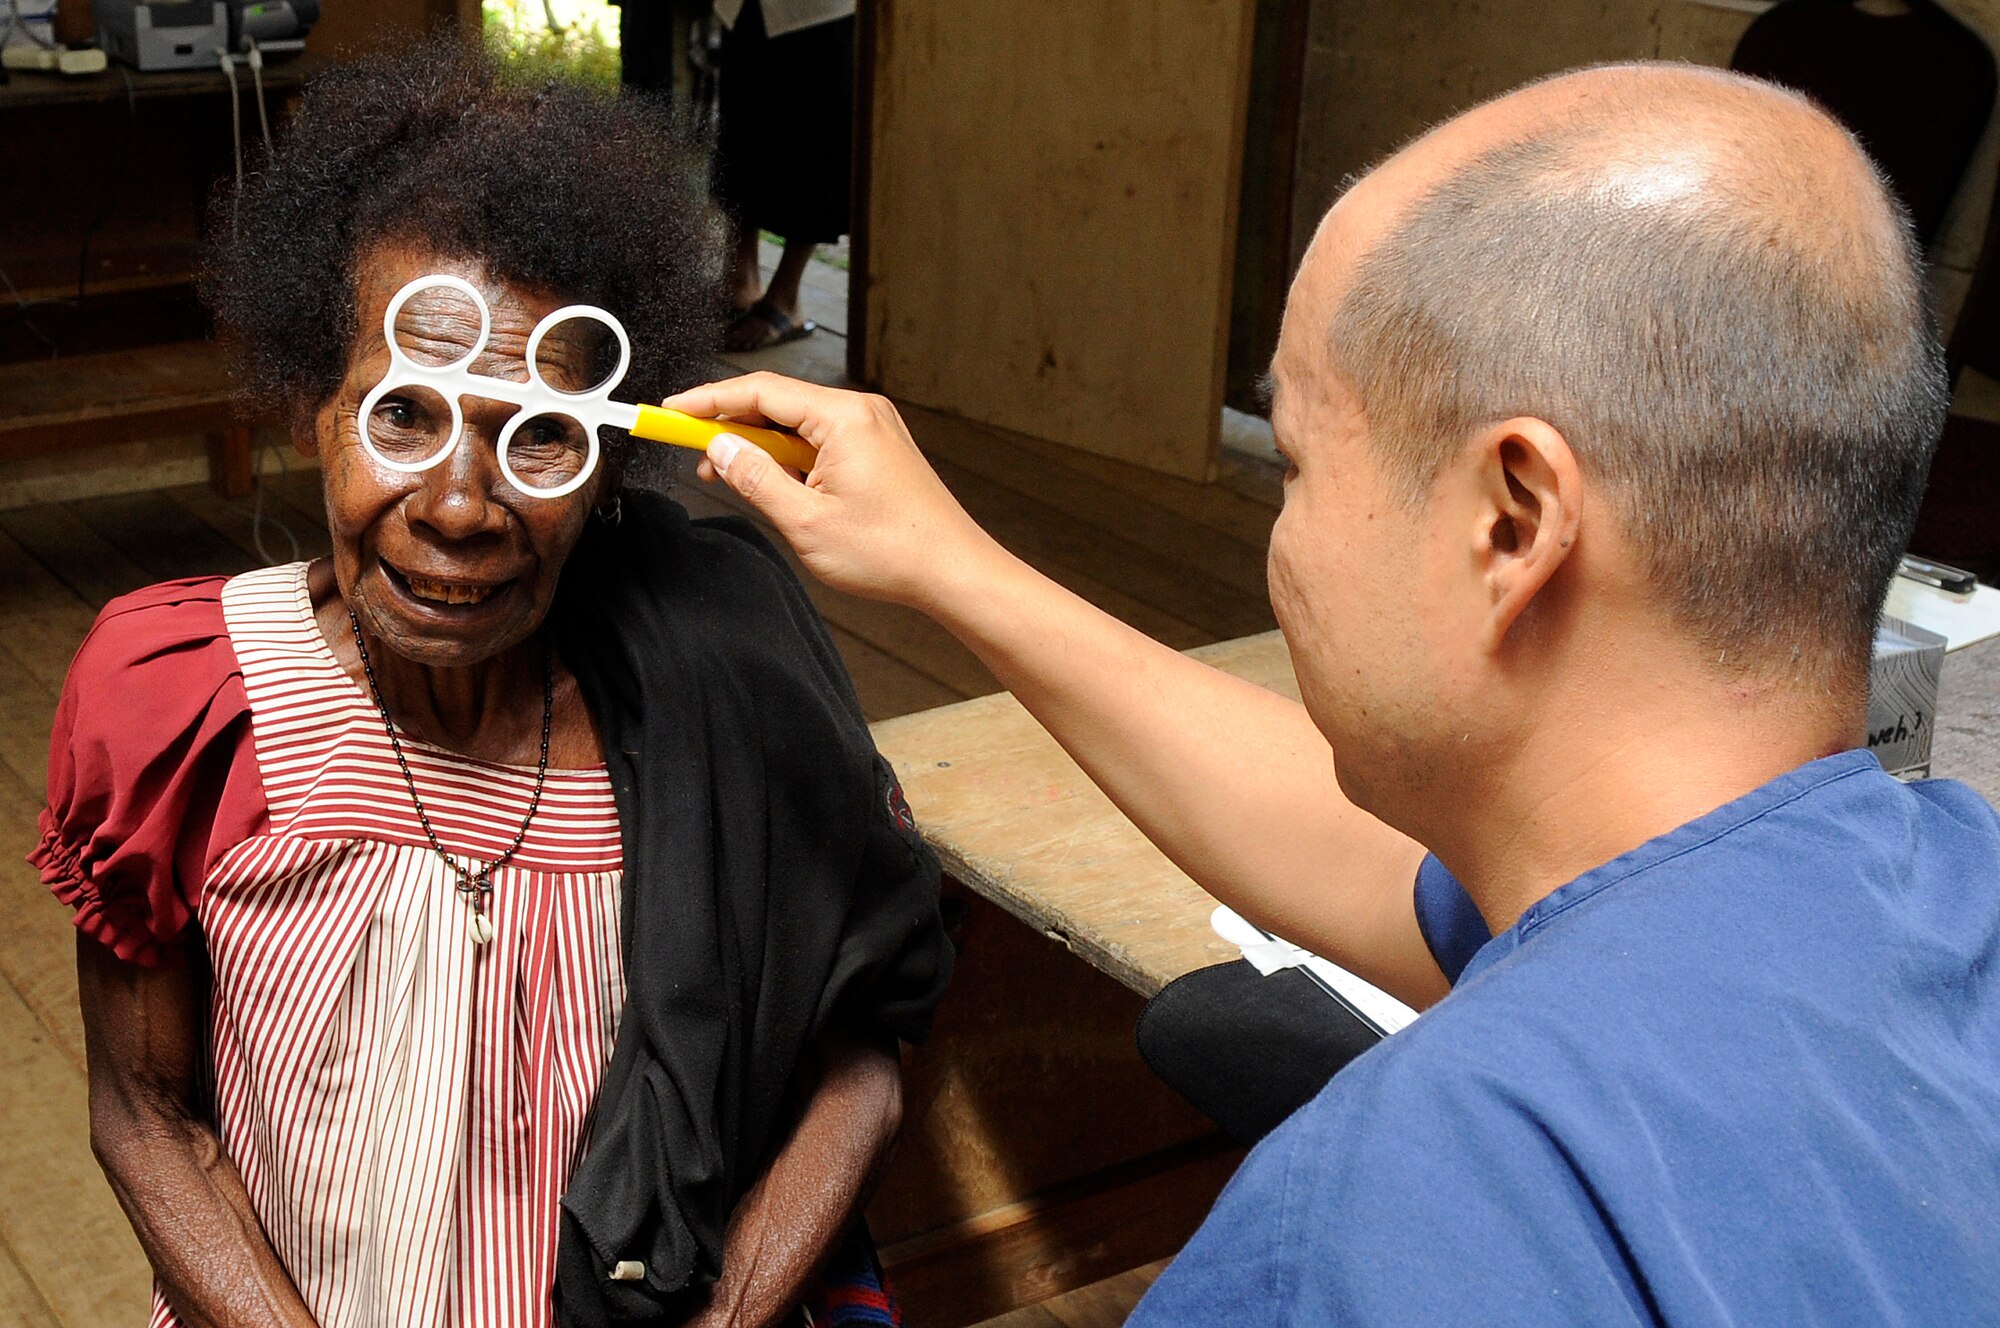 U.S. Air Force Lt. Col. Weilun Hsu, 374th Aerospace Medicine Squadron optometry flight commander from Yokota Air Base, Japan, determines which glasses to prescribe a local during Pacific Angel 15-4 at Unggai Primary School in Papua New Guinea, June 1, 2015. The optometrists prescribed more than 200 glasses, allowing the locals to walk away seeing better than before. (U.S. Air Force photo by Staff Sgt. Marcus Morris/Released)